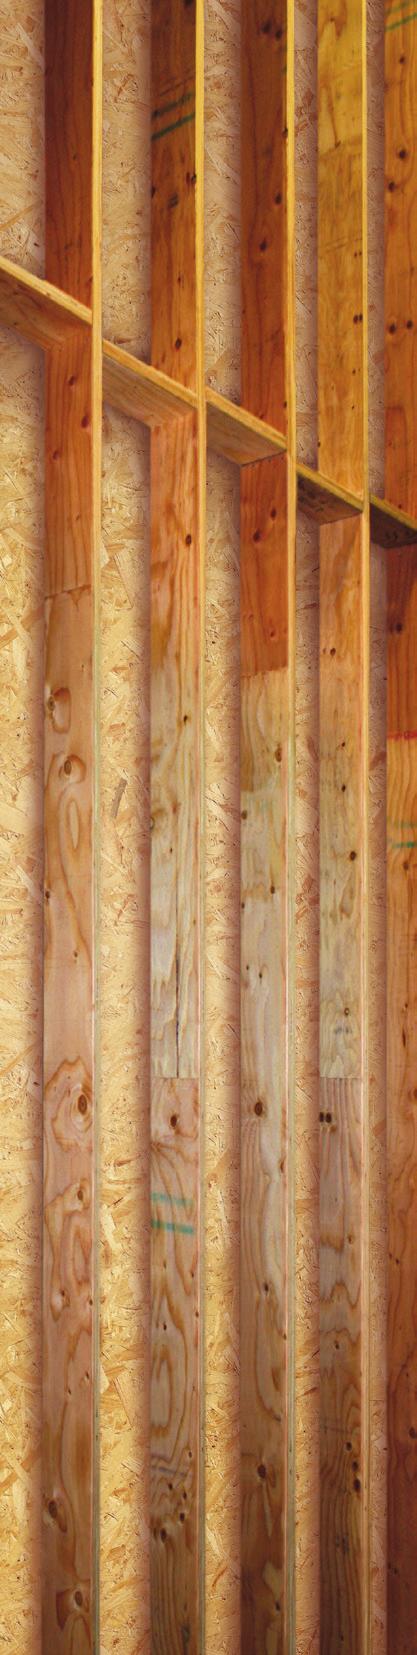 V1 P W L V L T A L L - W A L L S T U D S PWLVL STUDS LAMINATED VENEER LUMBER ENGINEERED FOR TALL-WALL FRAMING Build tall walls with confidence.